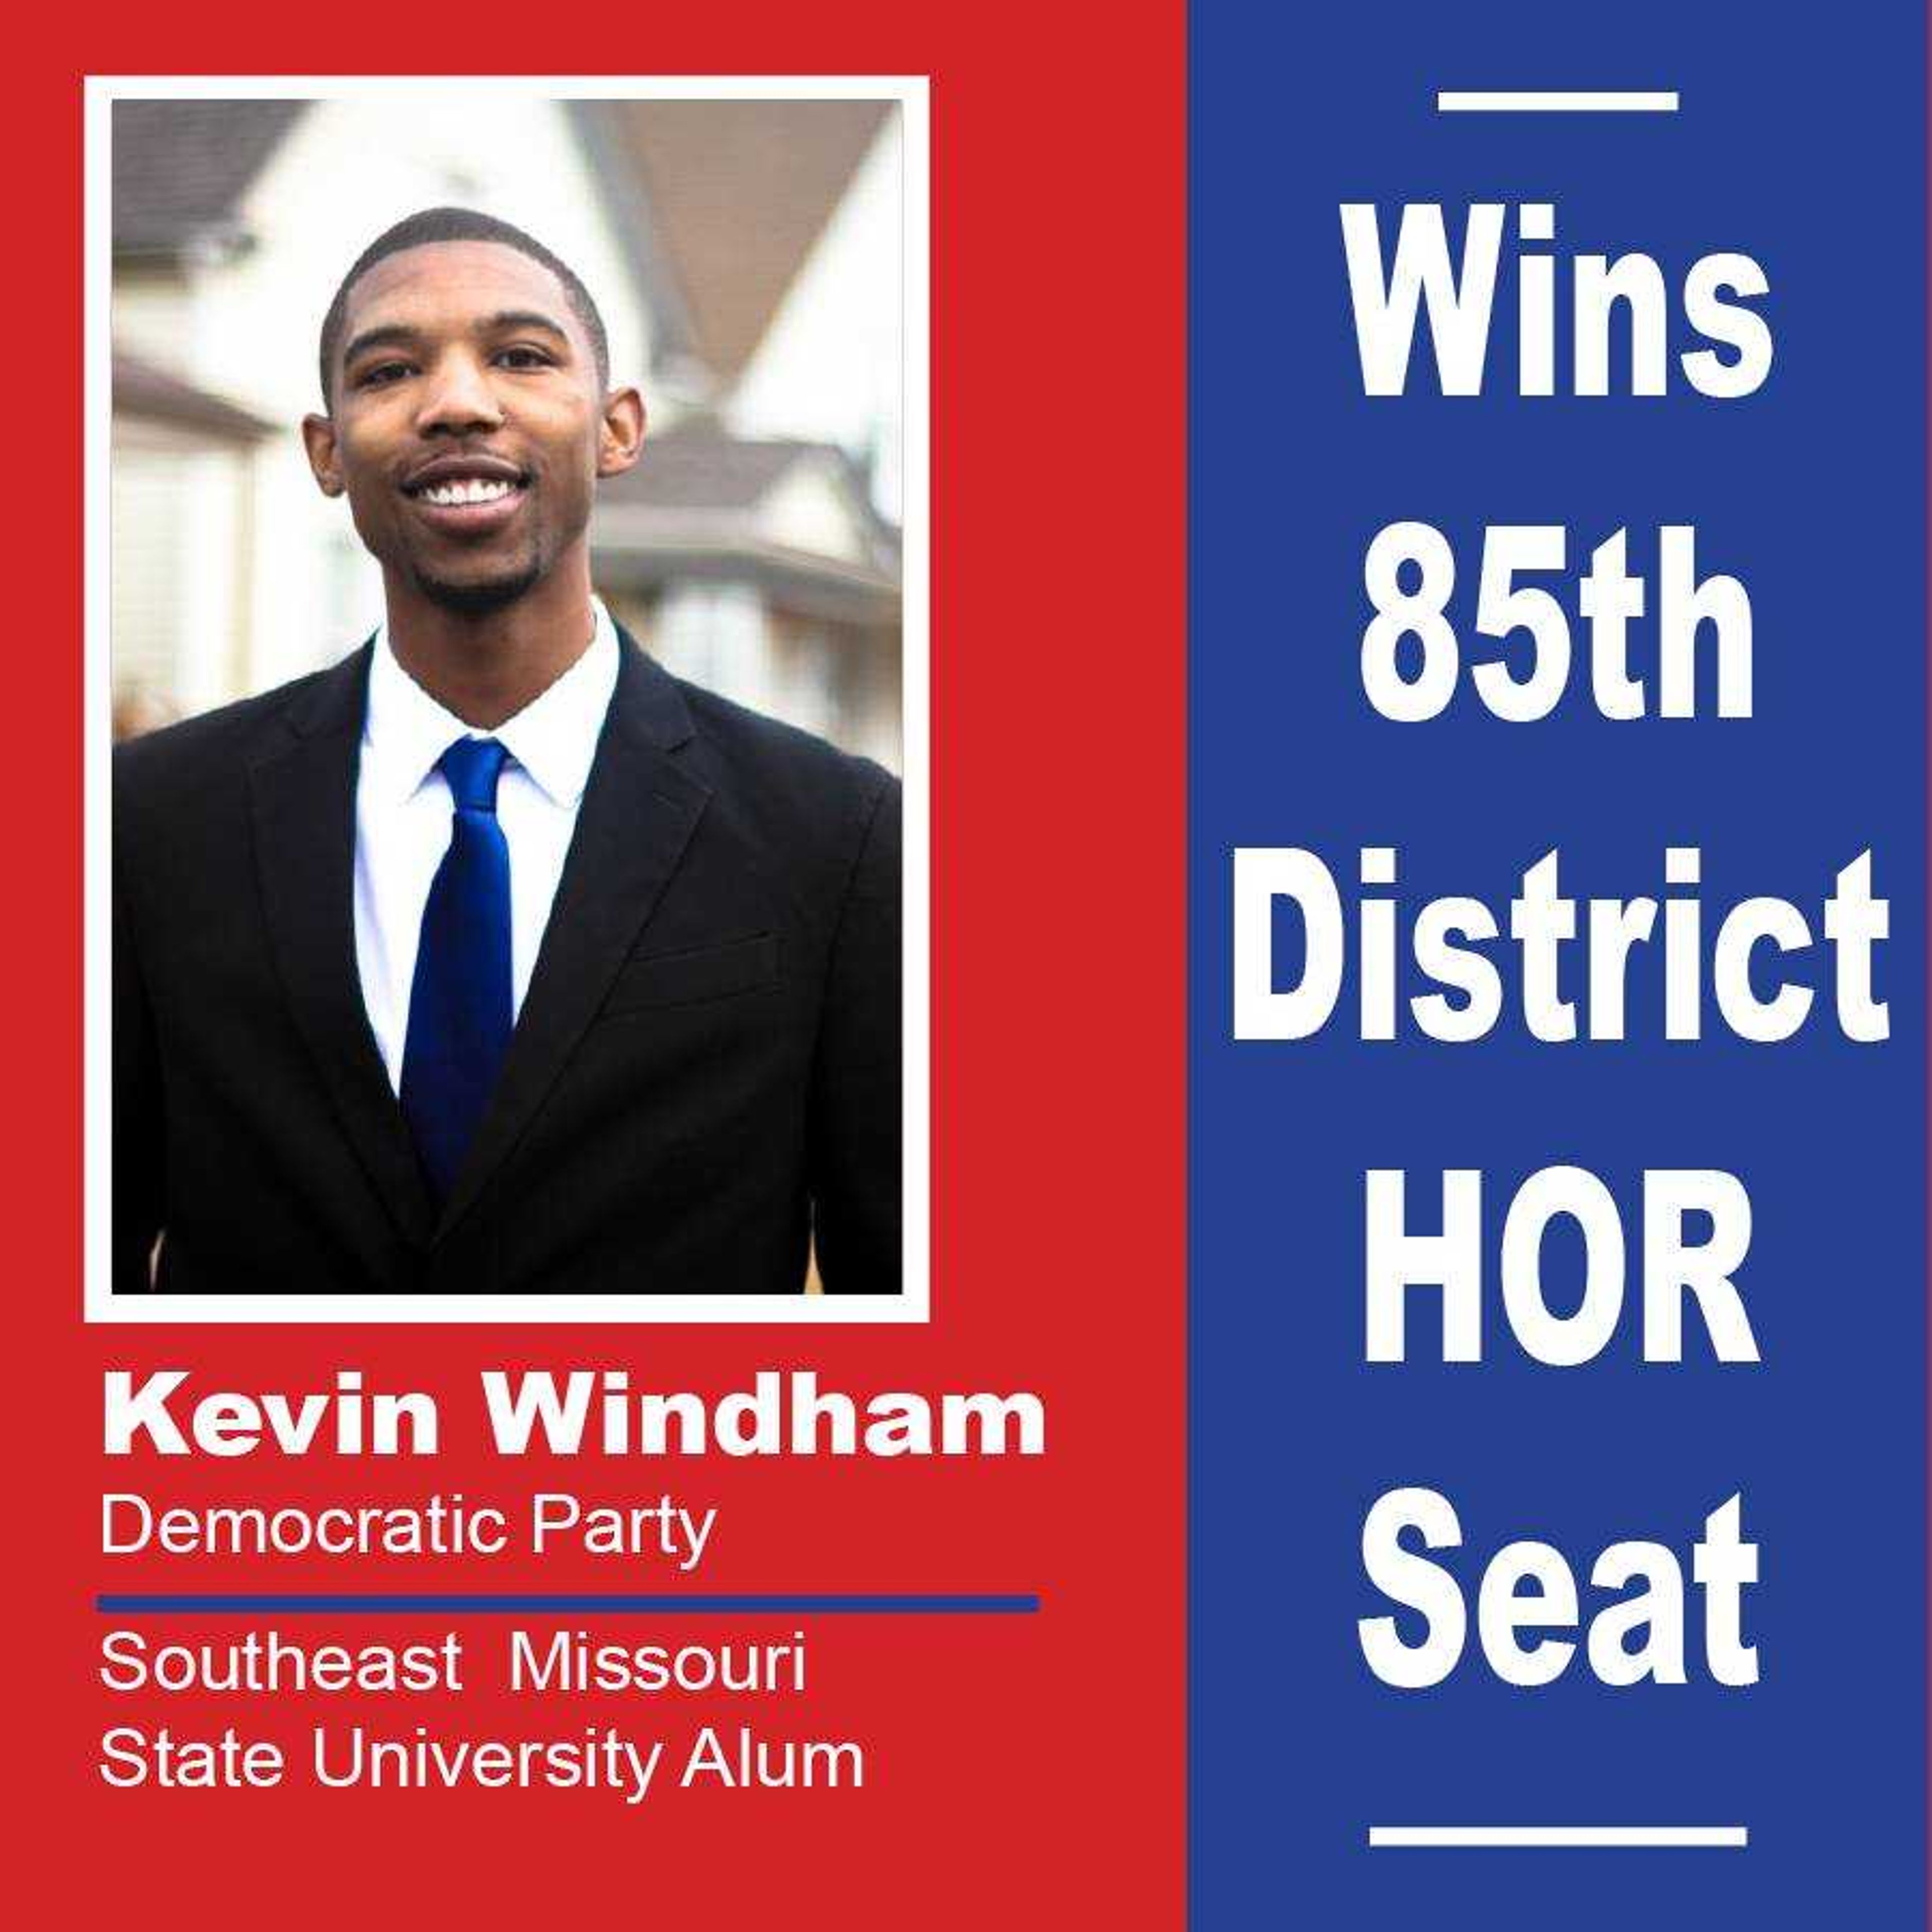 Kevin Windham wins the 85th District